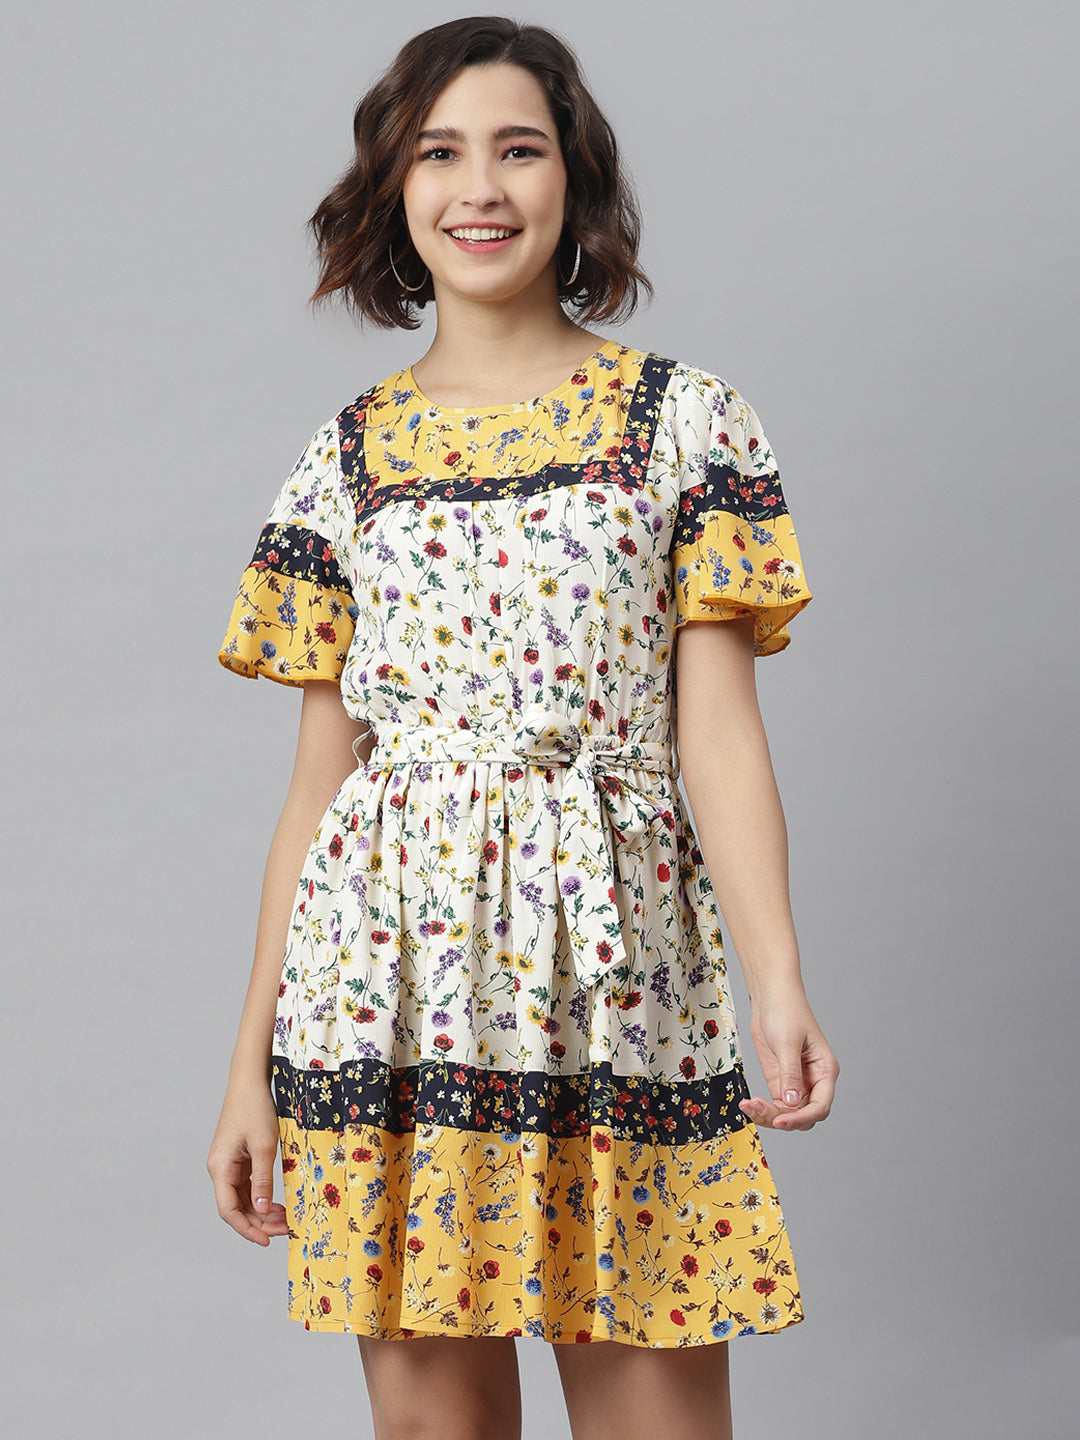 Women's Floral Printed Dress